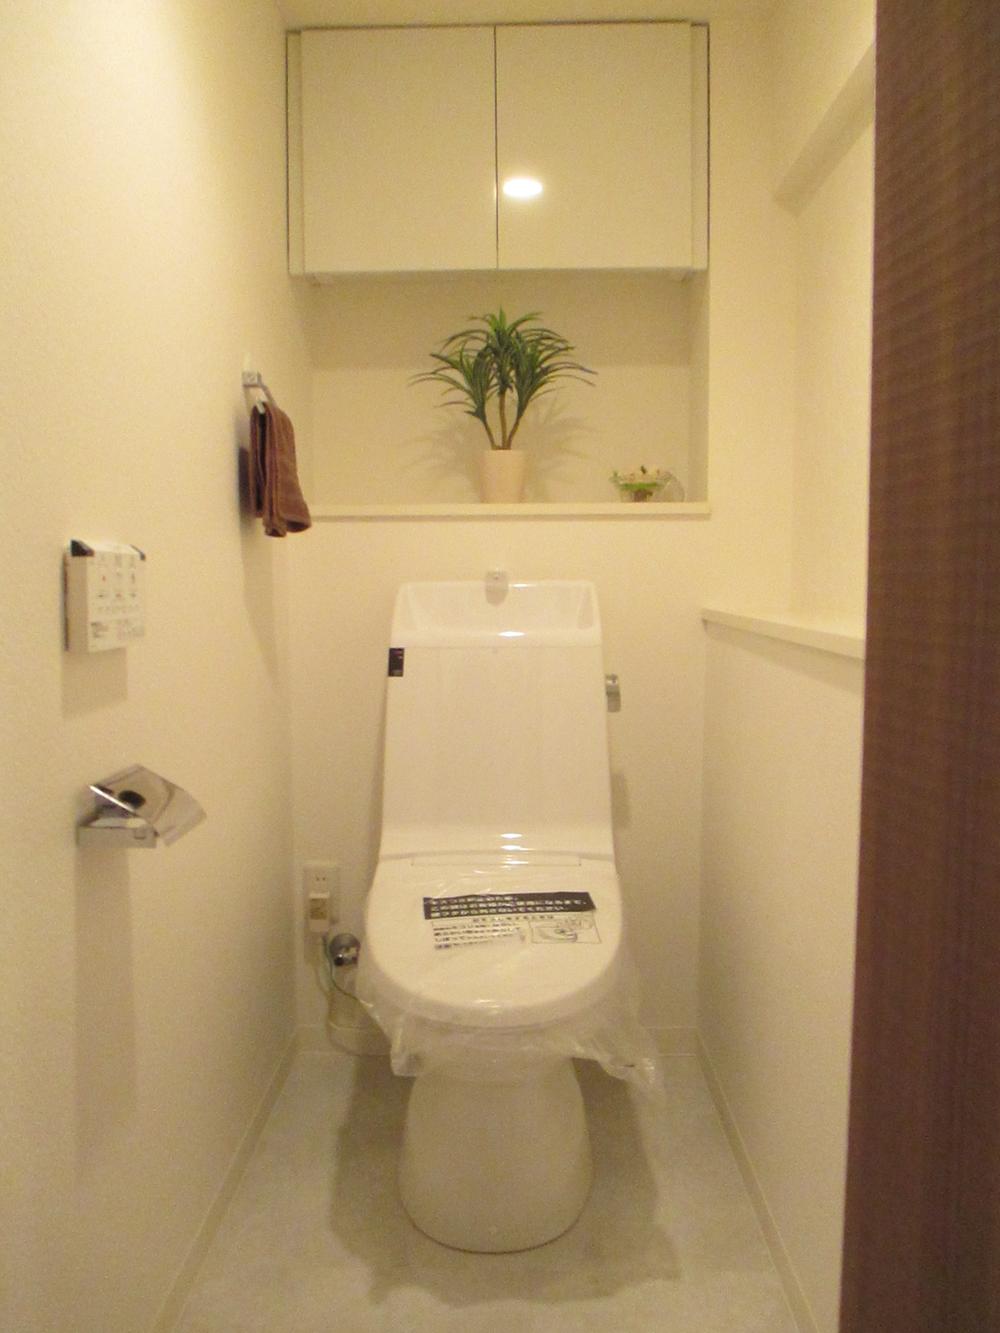 Toilet. It comes with a shower heated toilet seat.